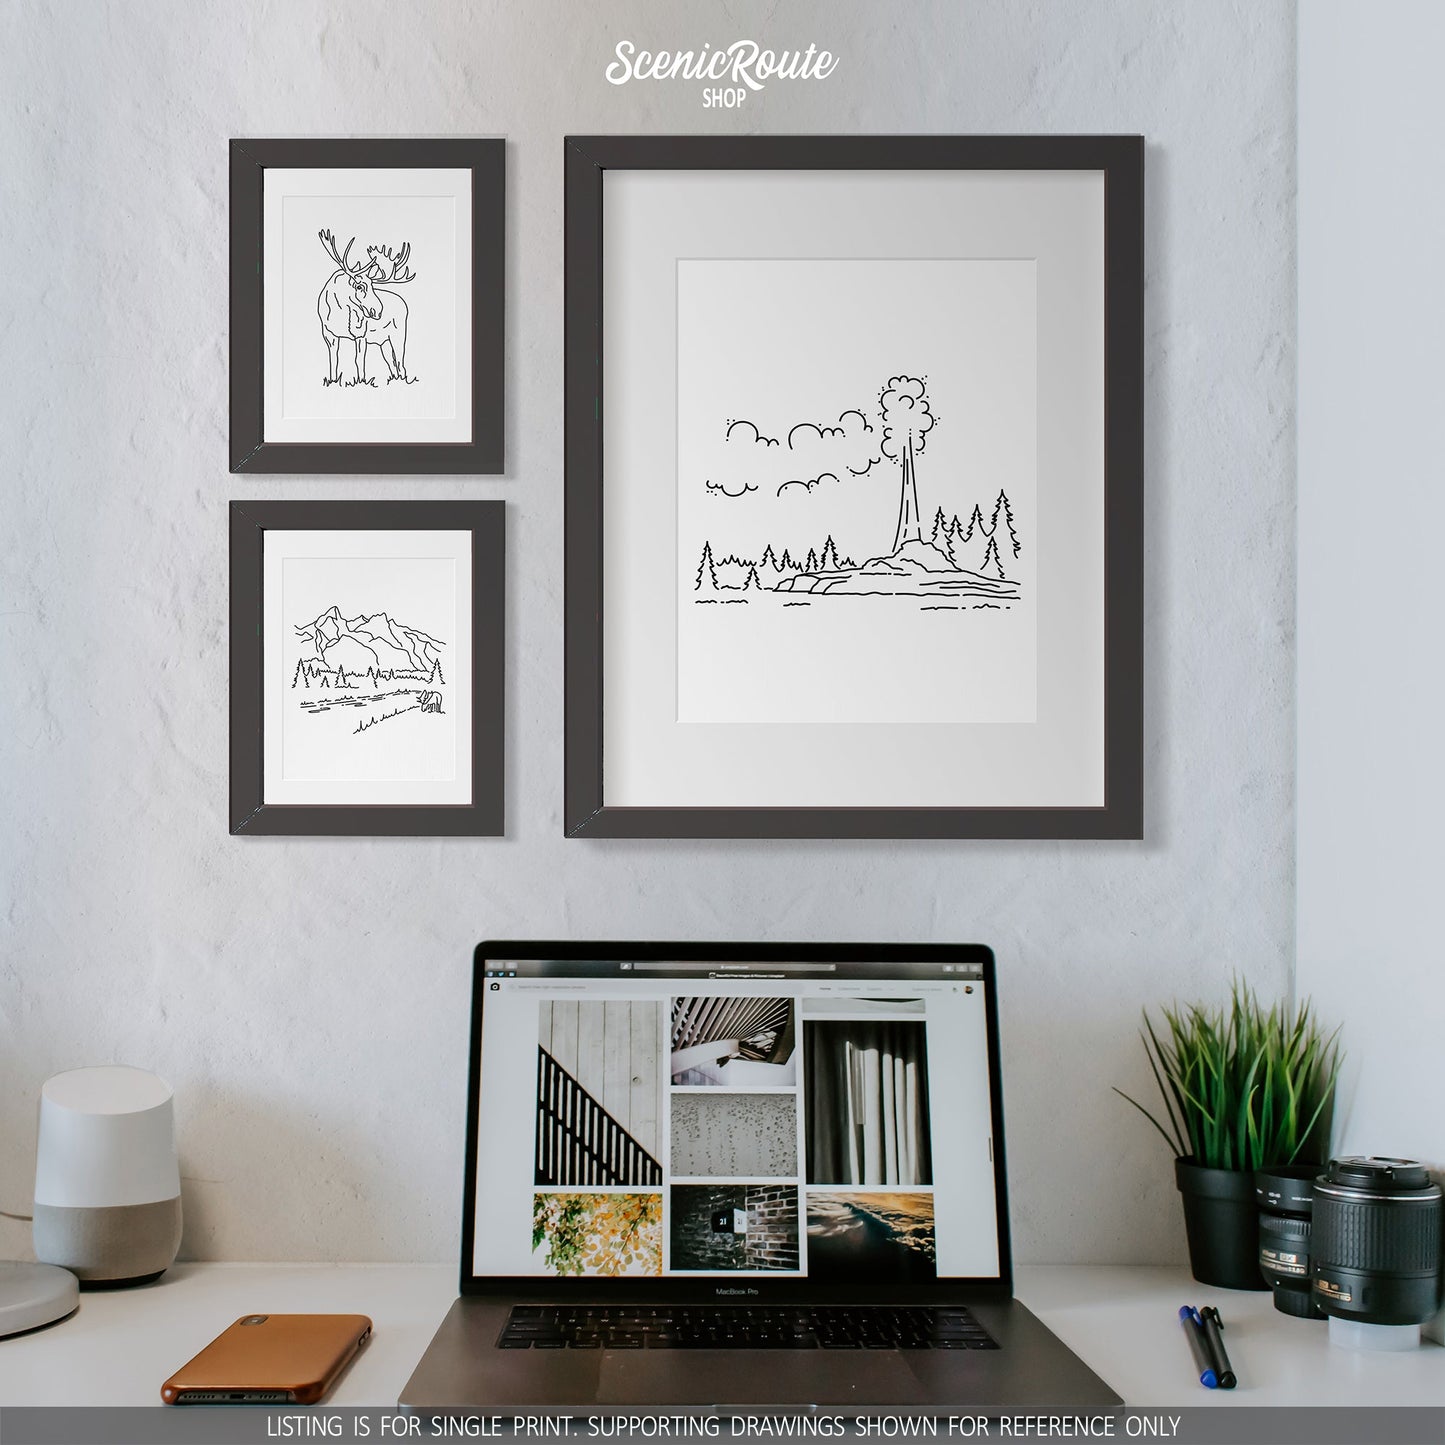 A group of three framed drawings on a wall above a desk with a laptop. The line art drawings include a Moose, Grand Teton National Park, and Yellowstone National Park